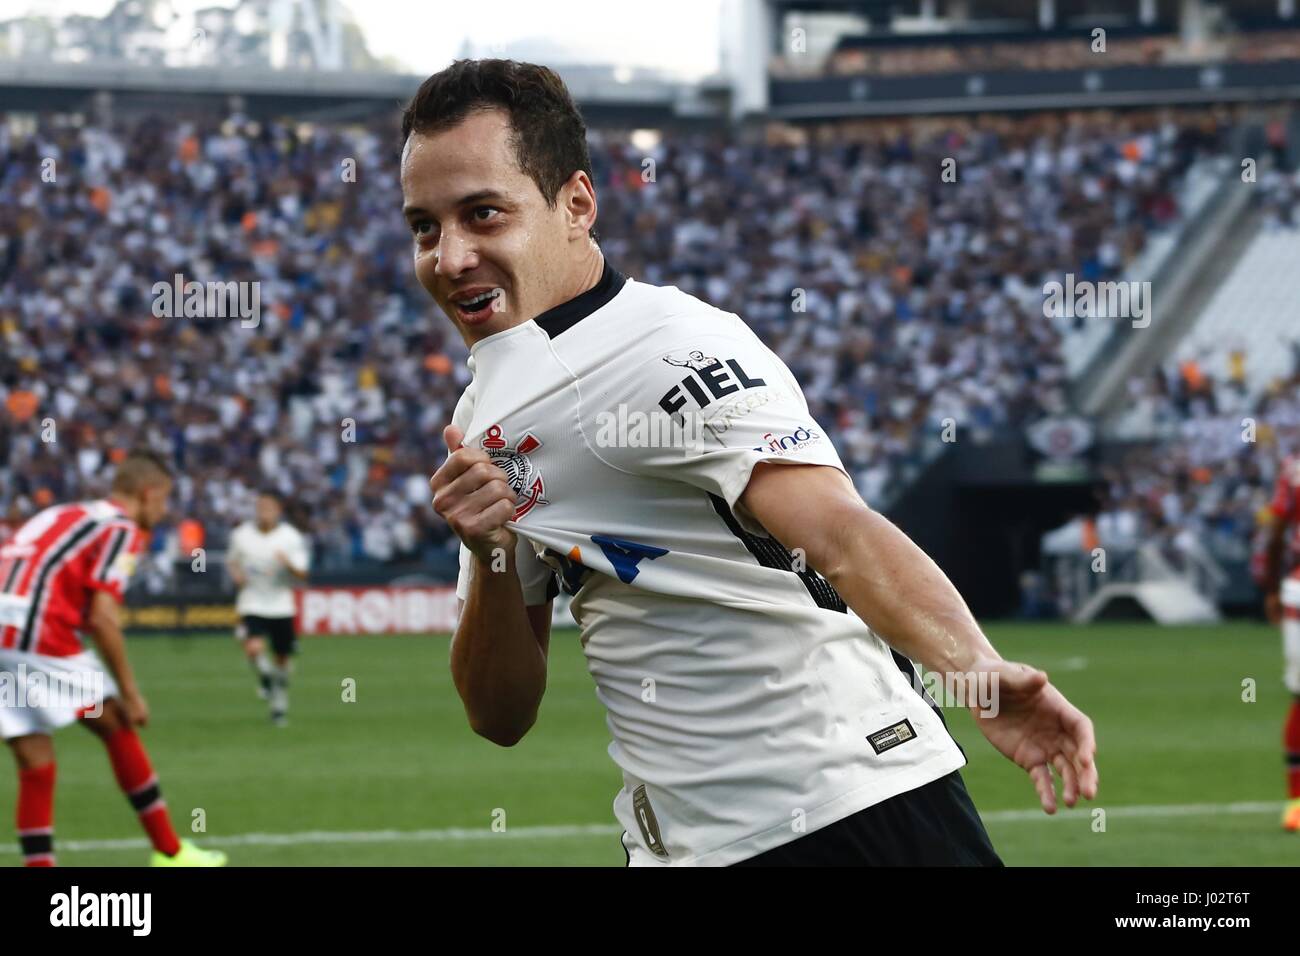 Rodriguinho do Corinthians celebrates goal during a match against Botafogo SP in the quarterfinals of the Campeonato Paulista, at Corinthians Arena, on Sunday afternoon, 09.  (PHOTO: ADRIANA SPACA/BRAZIL PHOTO PRESS) Stock Photo